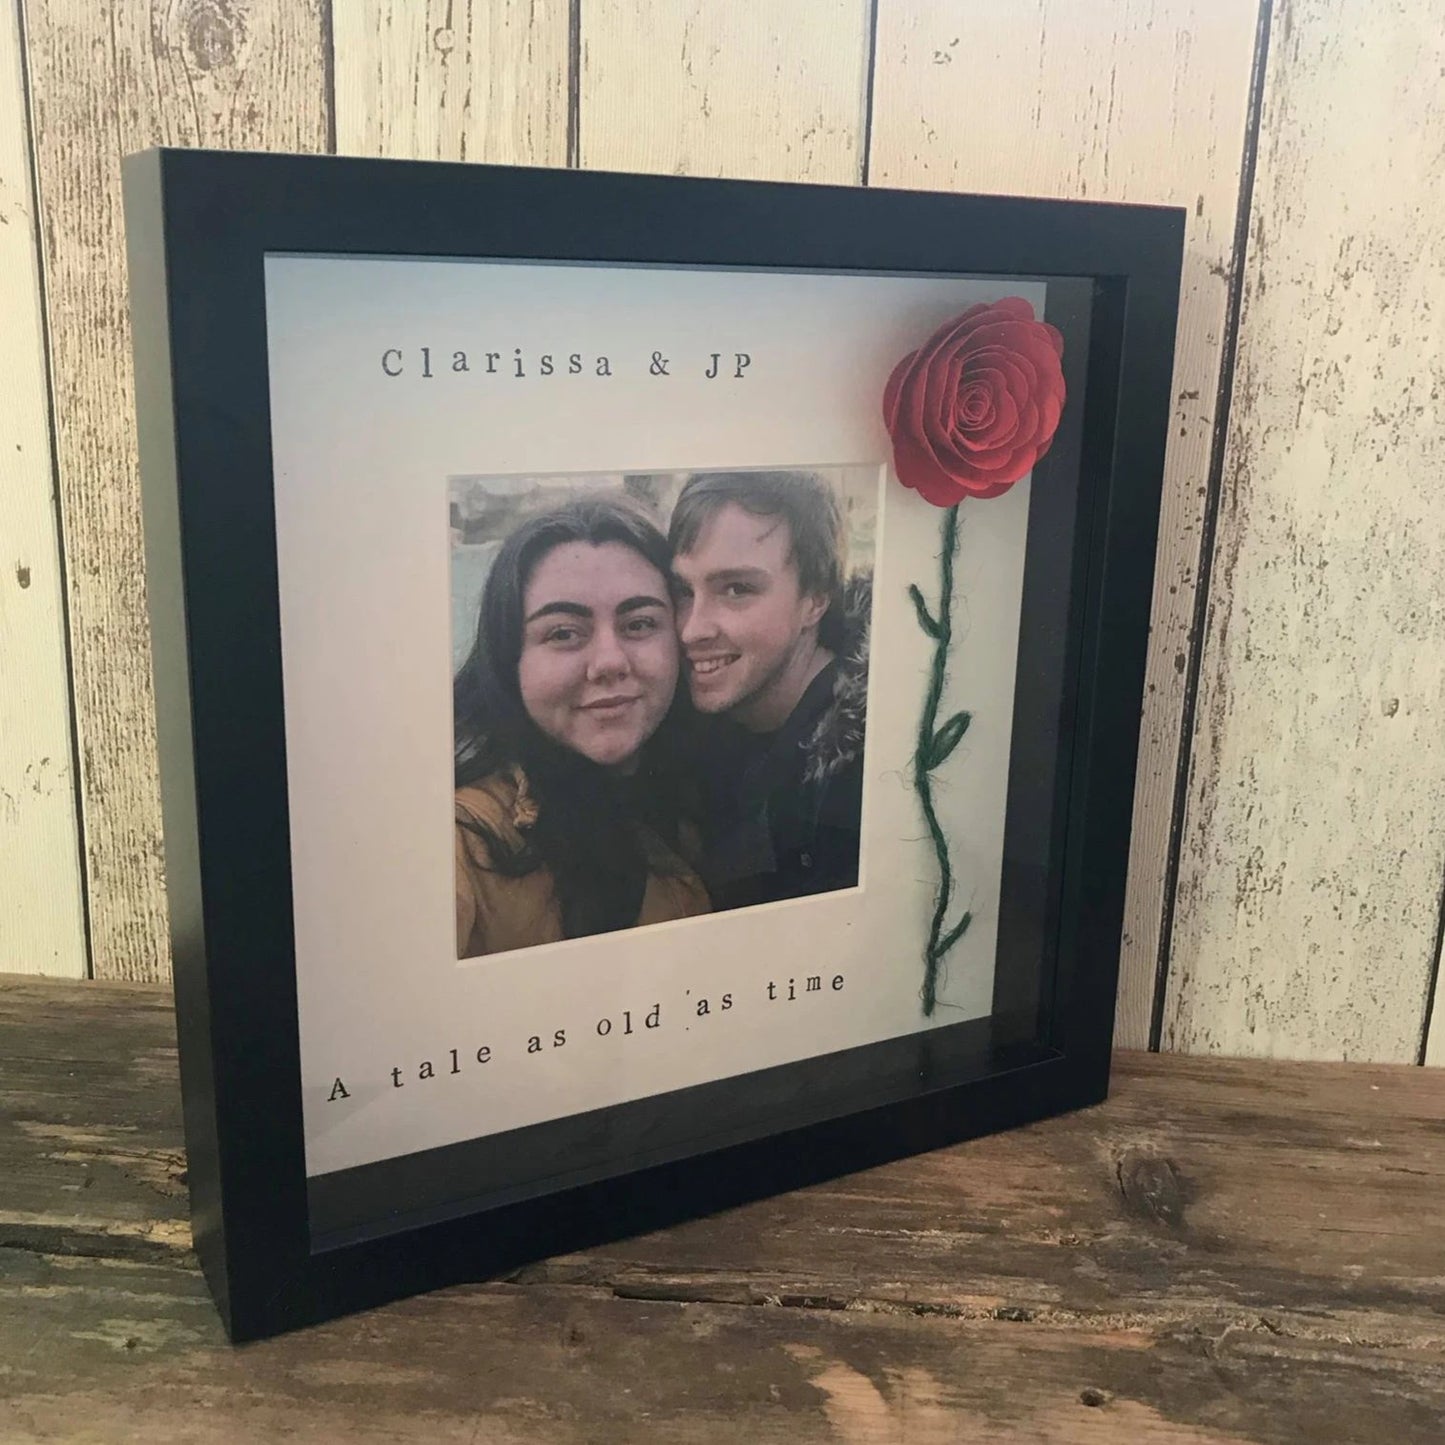 A Tale as Old as Time Beauty and the Beast Photo Frame from The Wrong End of Town